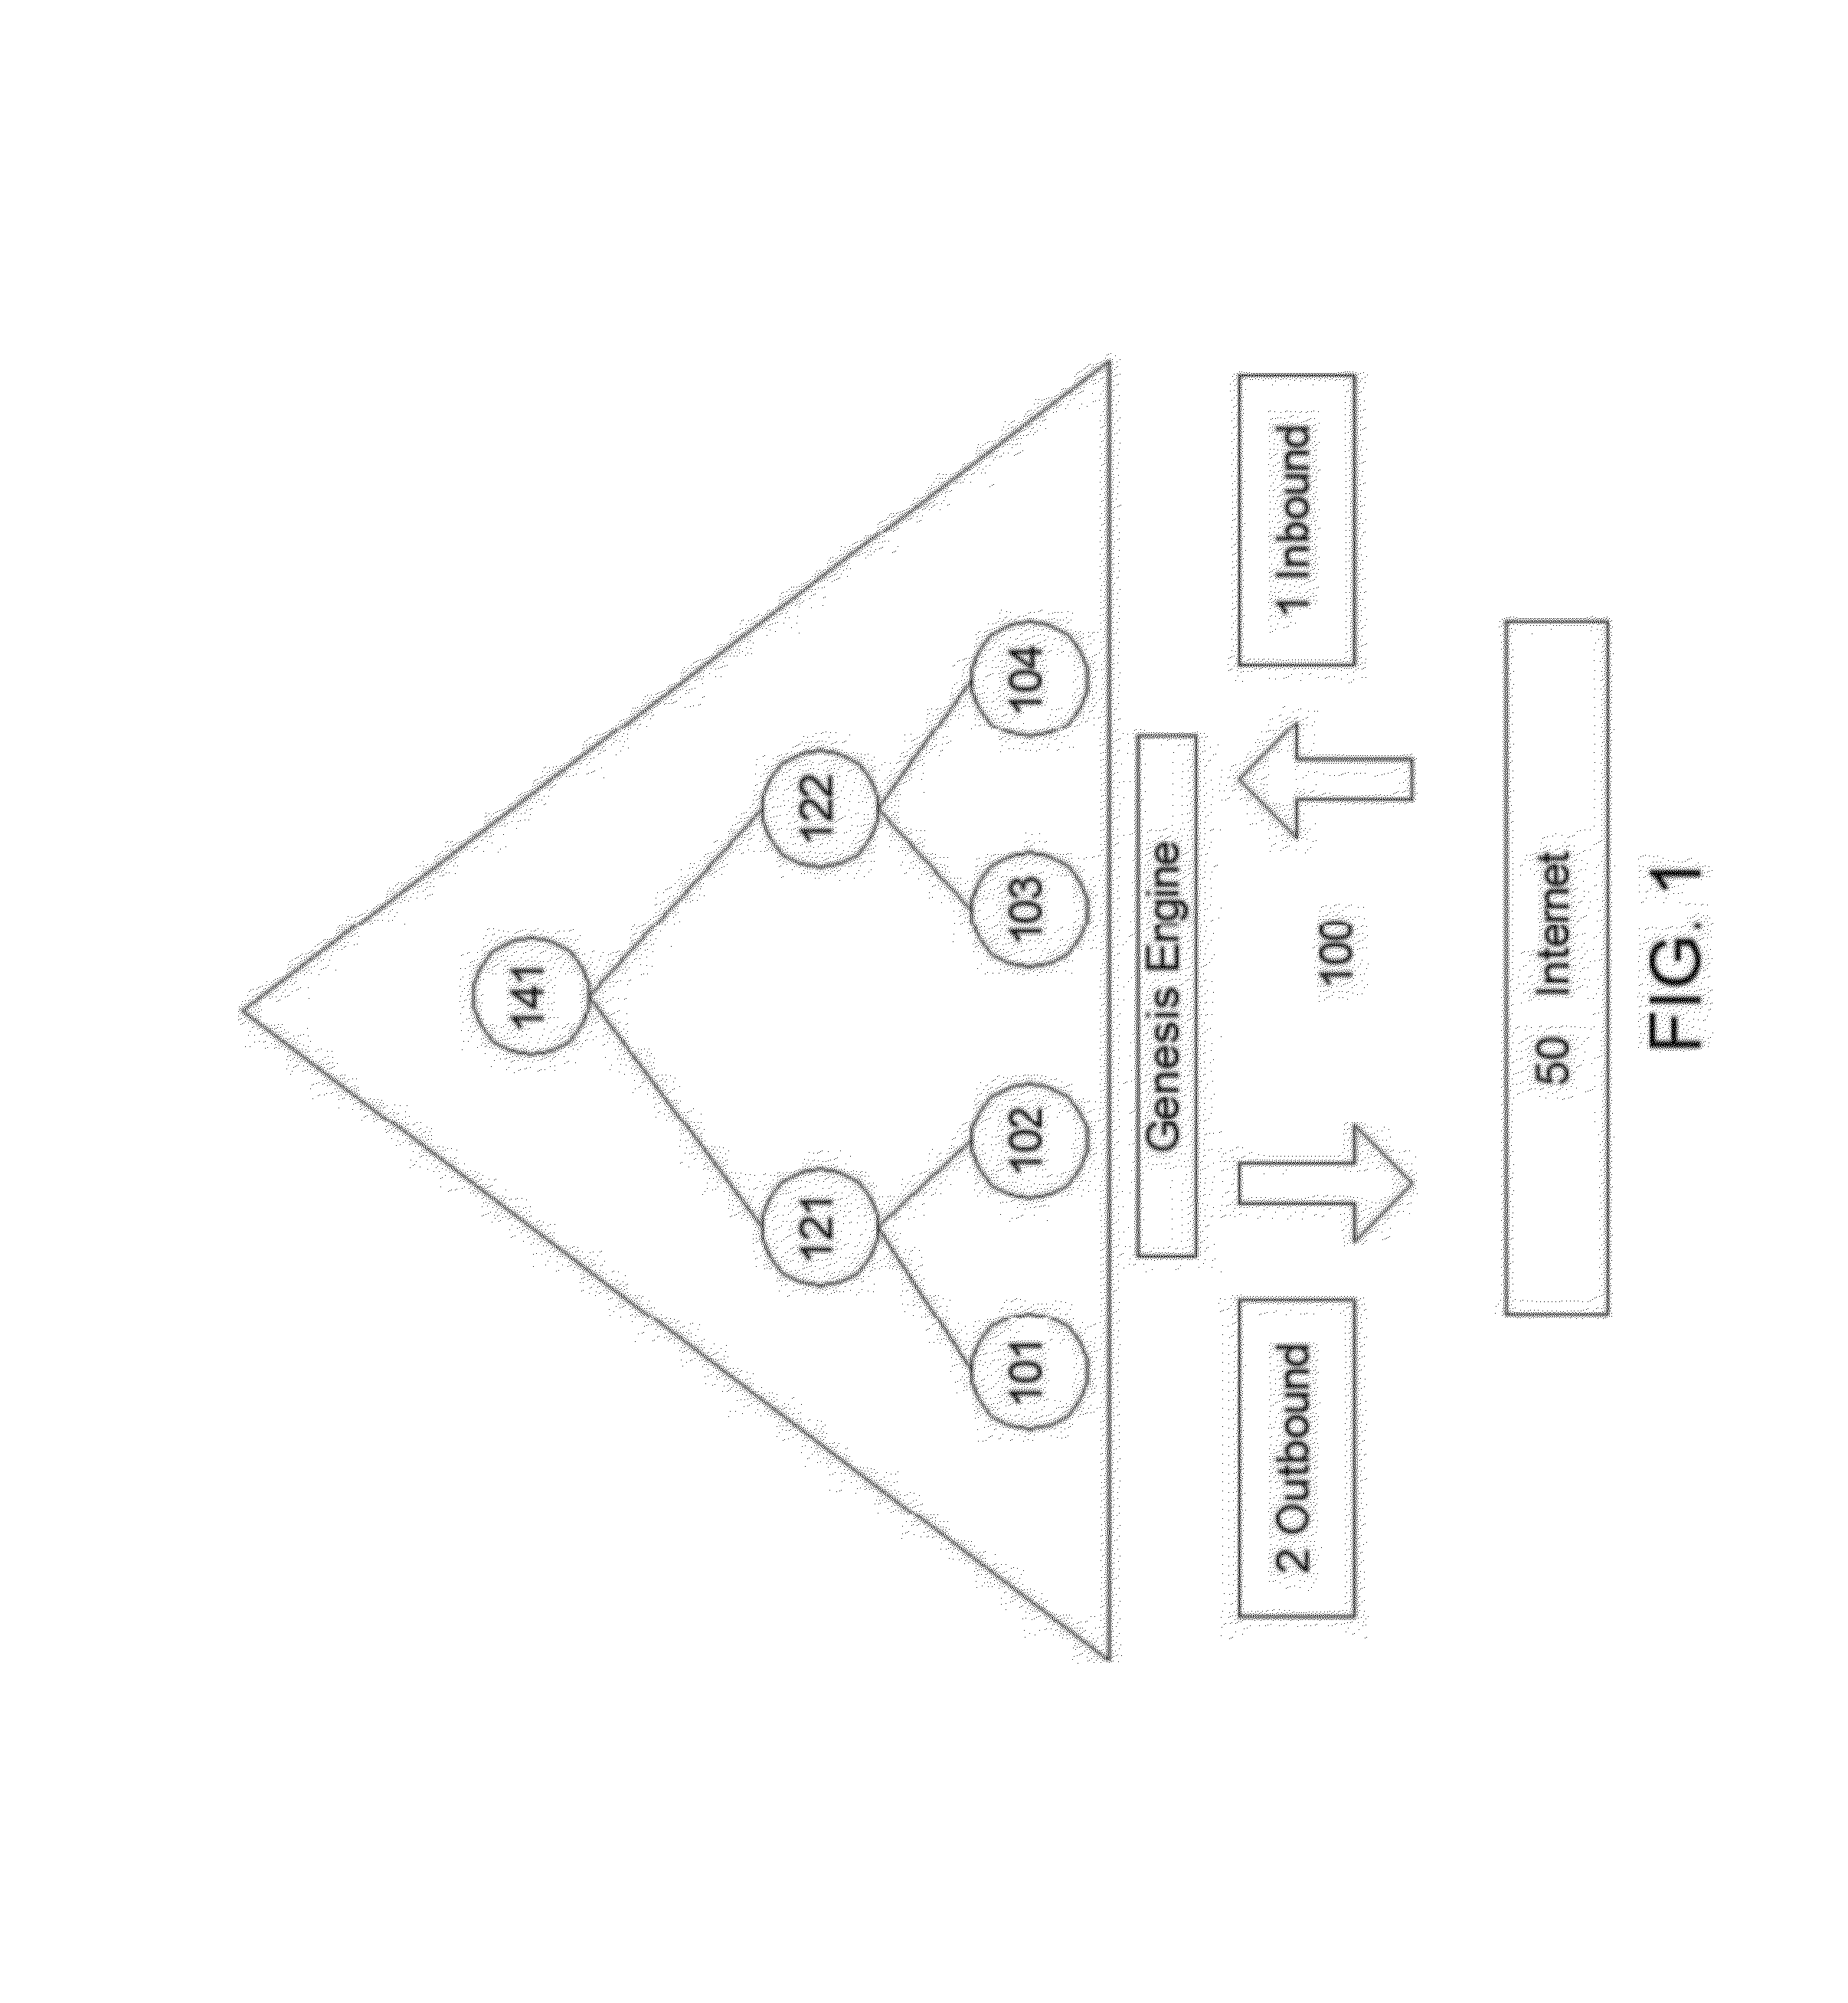 Parallel computer network and method for real time financial resource management, inventory control, and online purchasing